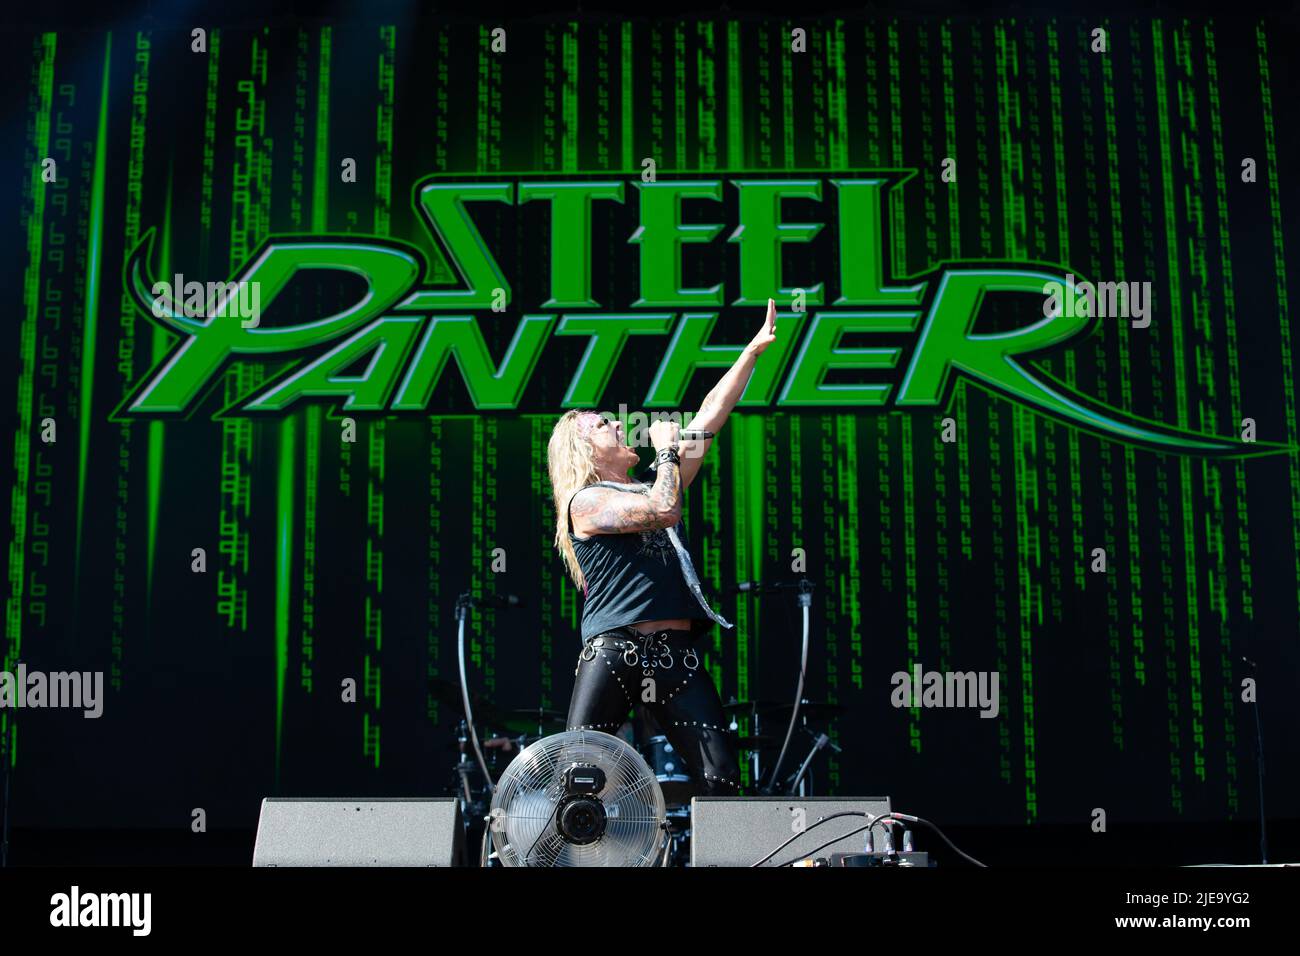 Oslo, Norway. 24th, June 2022. The American glam metal band Steel Panther performs a live concert during the Norwegian music festival Tons of Rock 2022 in Oslo. Here vocalist Michael Starr is seen live on stage. (Photo credit: Gonzales Photo - Per-Otto Oppi). Stock Photo